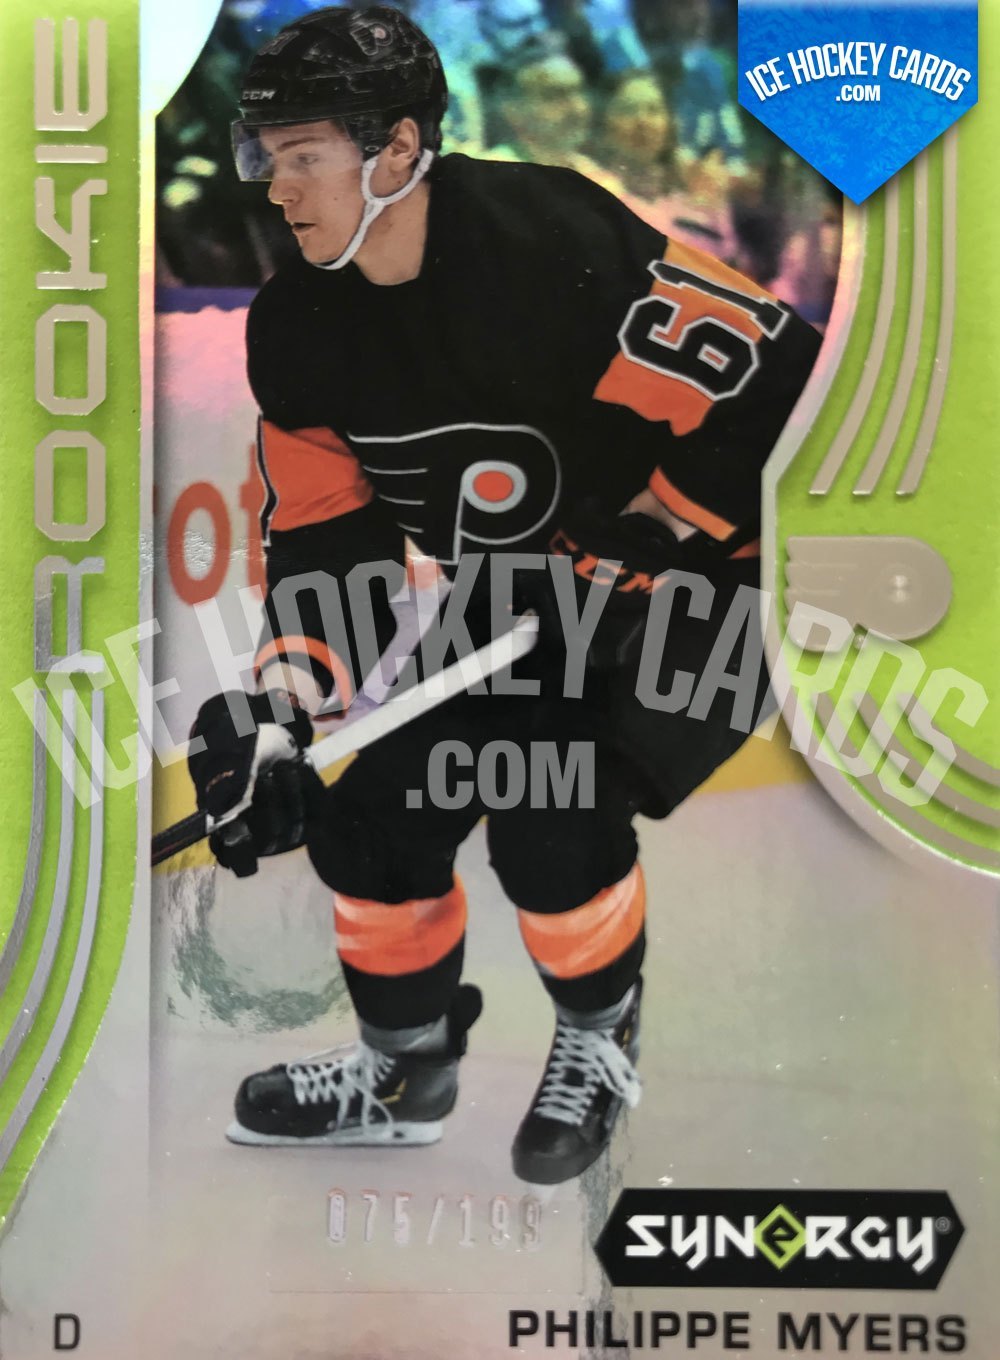 Upper Deck - Synergy 19-20 - Philippe Myers Rookie Card Green